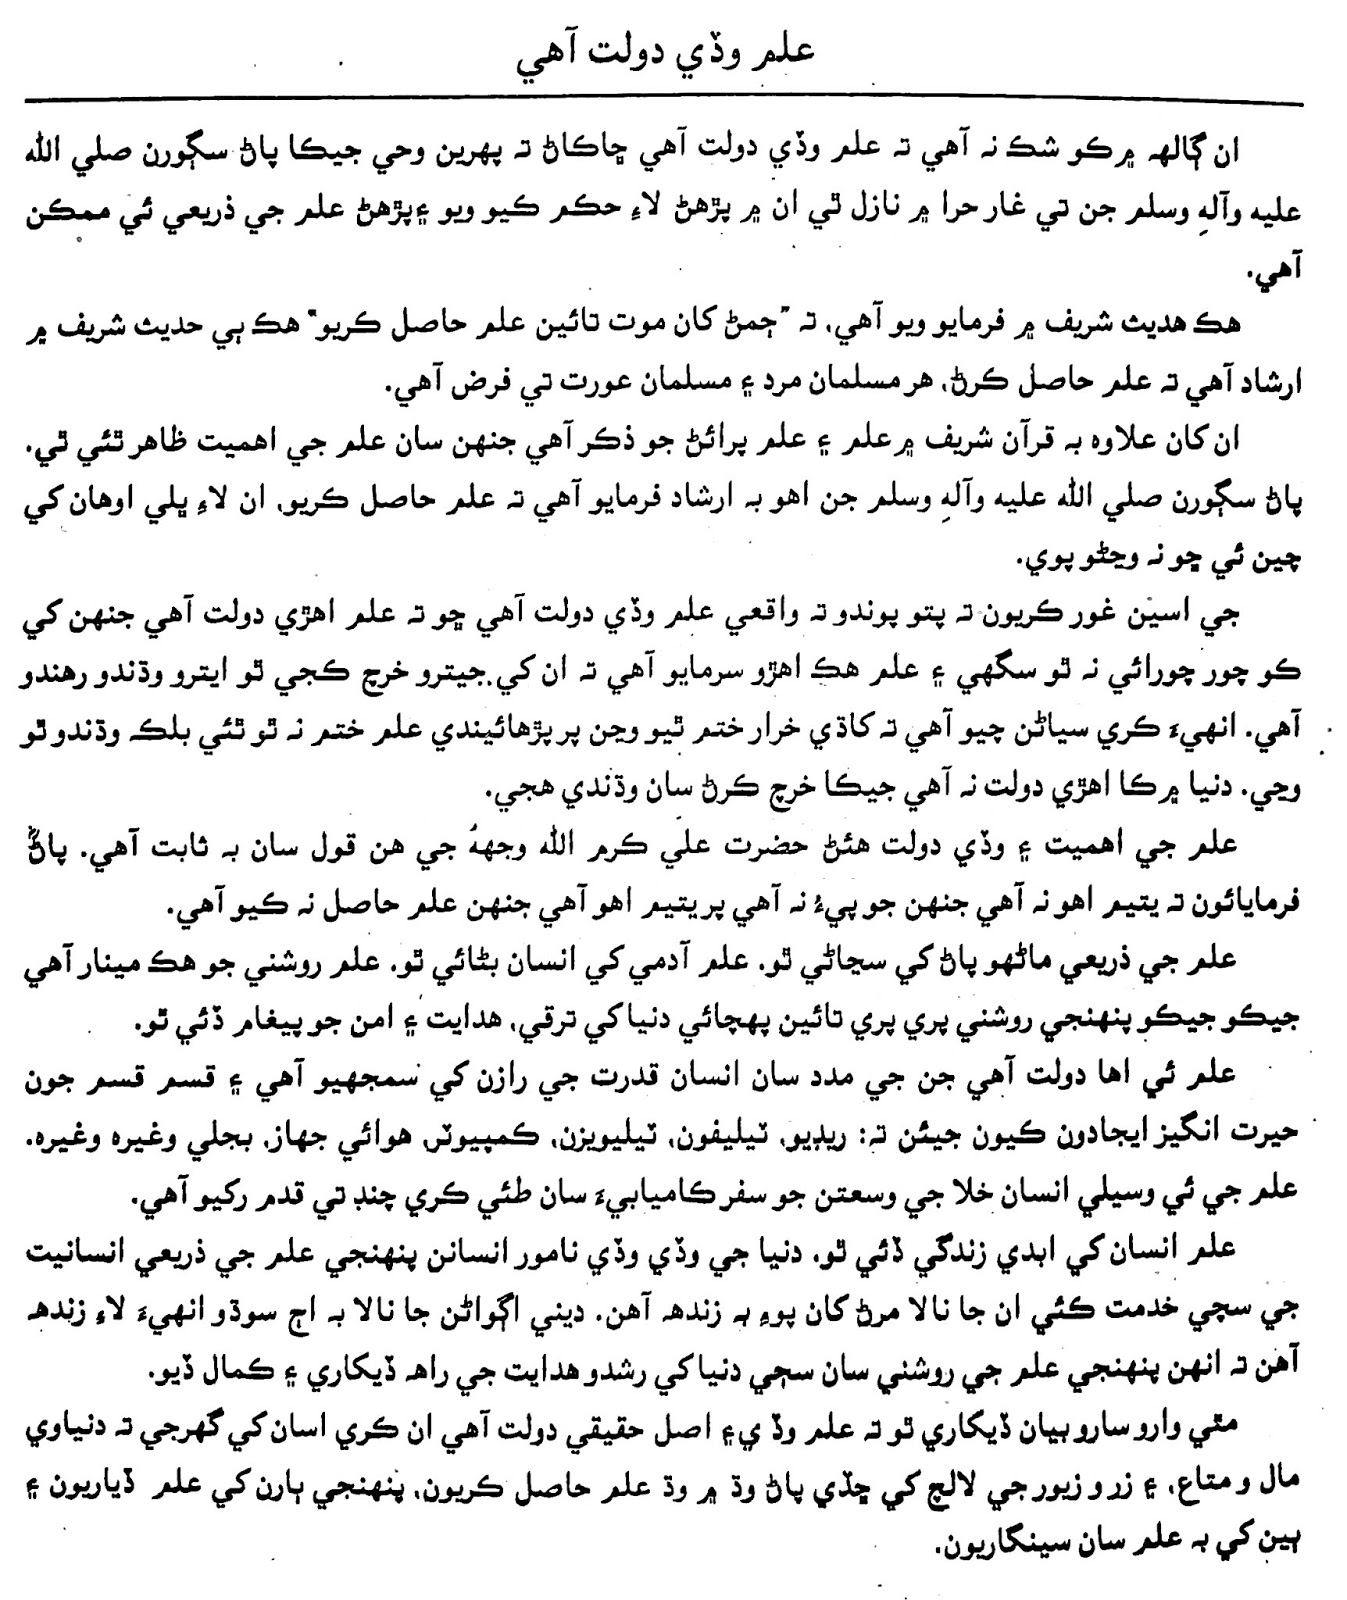 how to write essay in sindhi